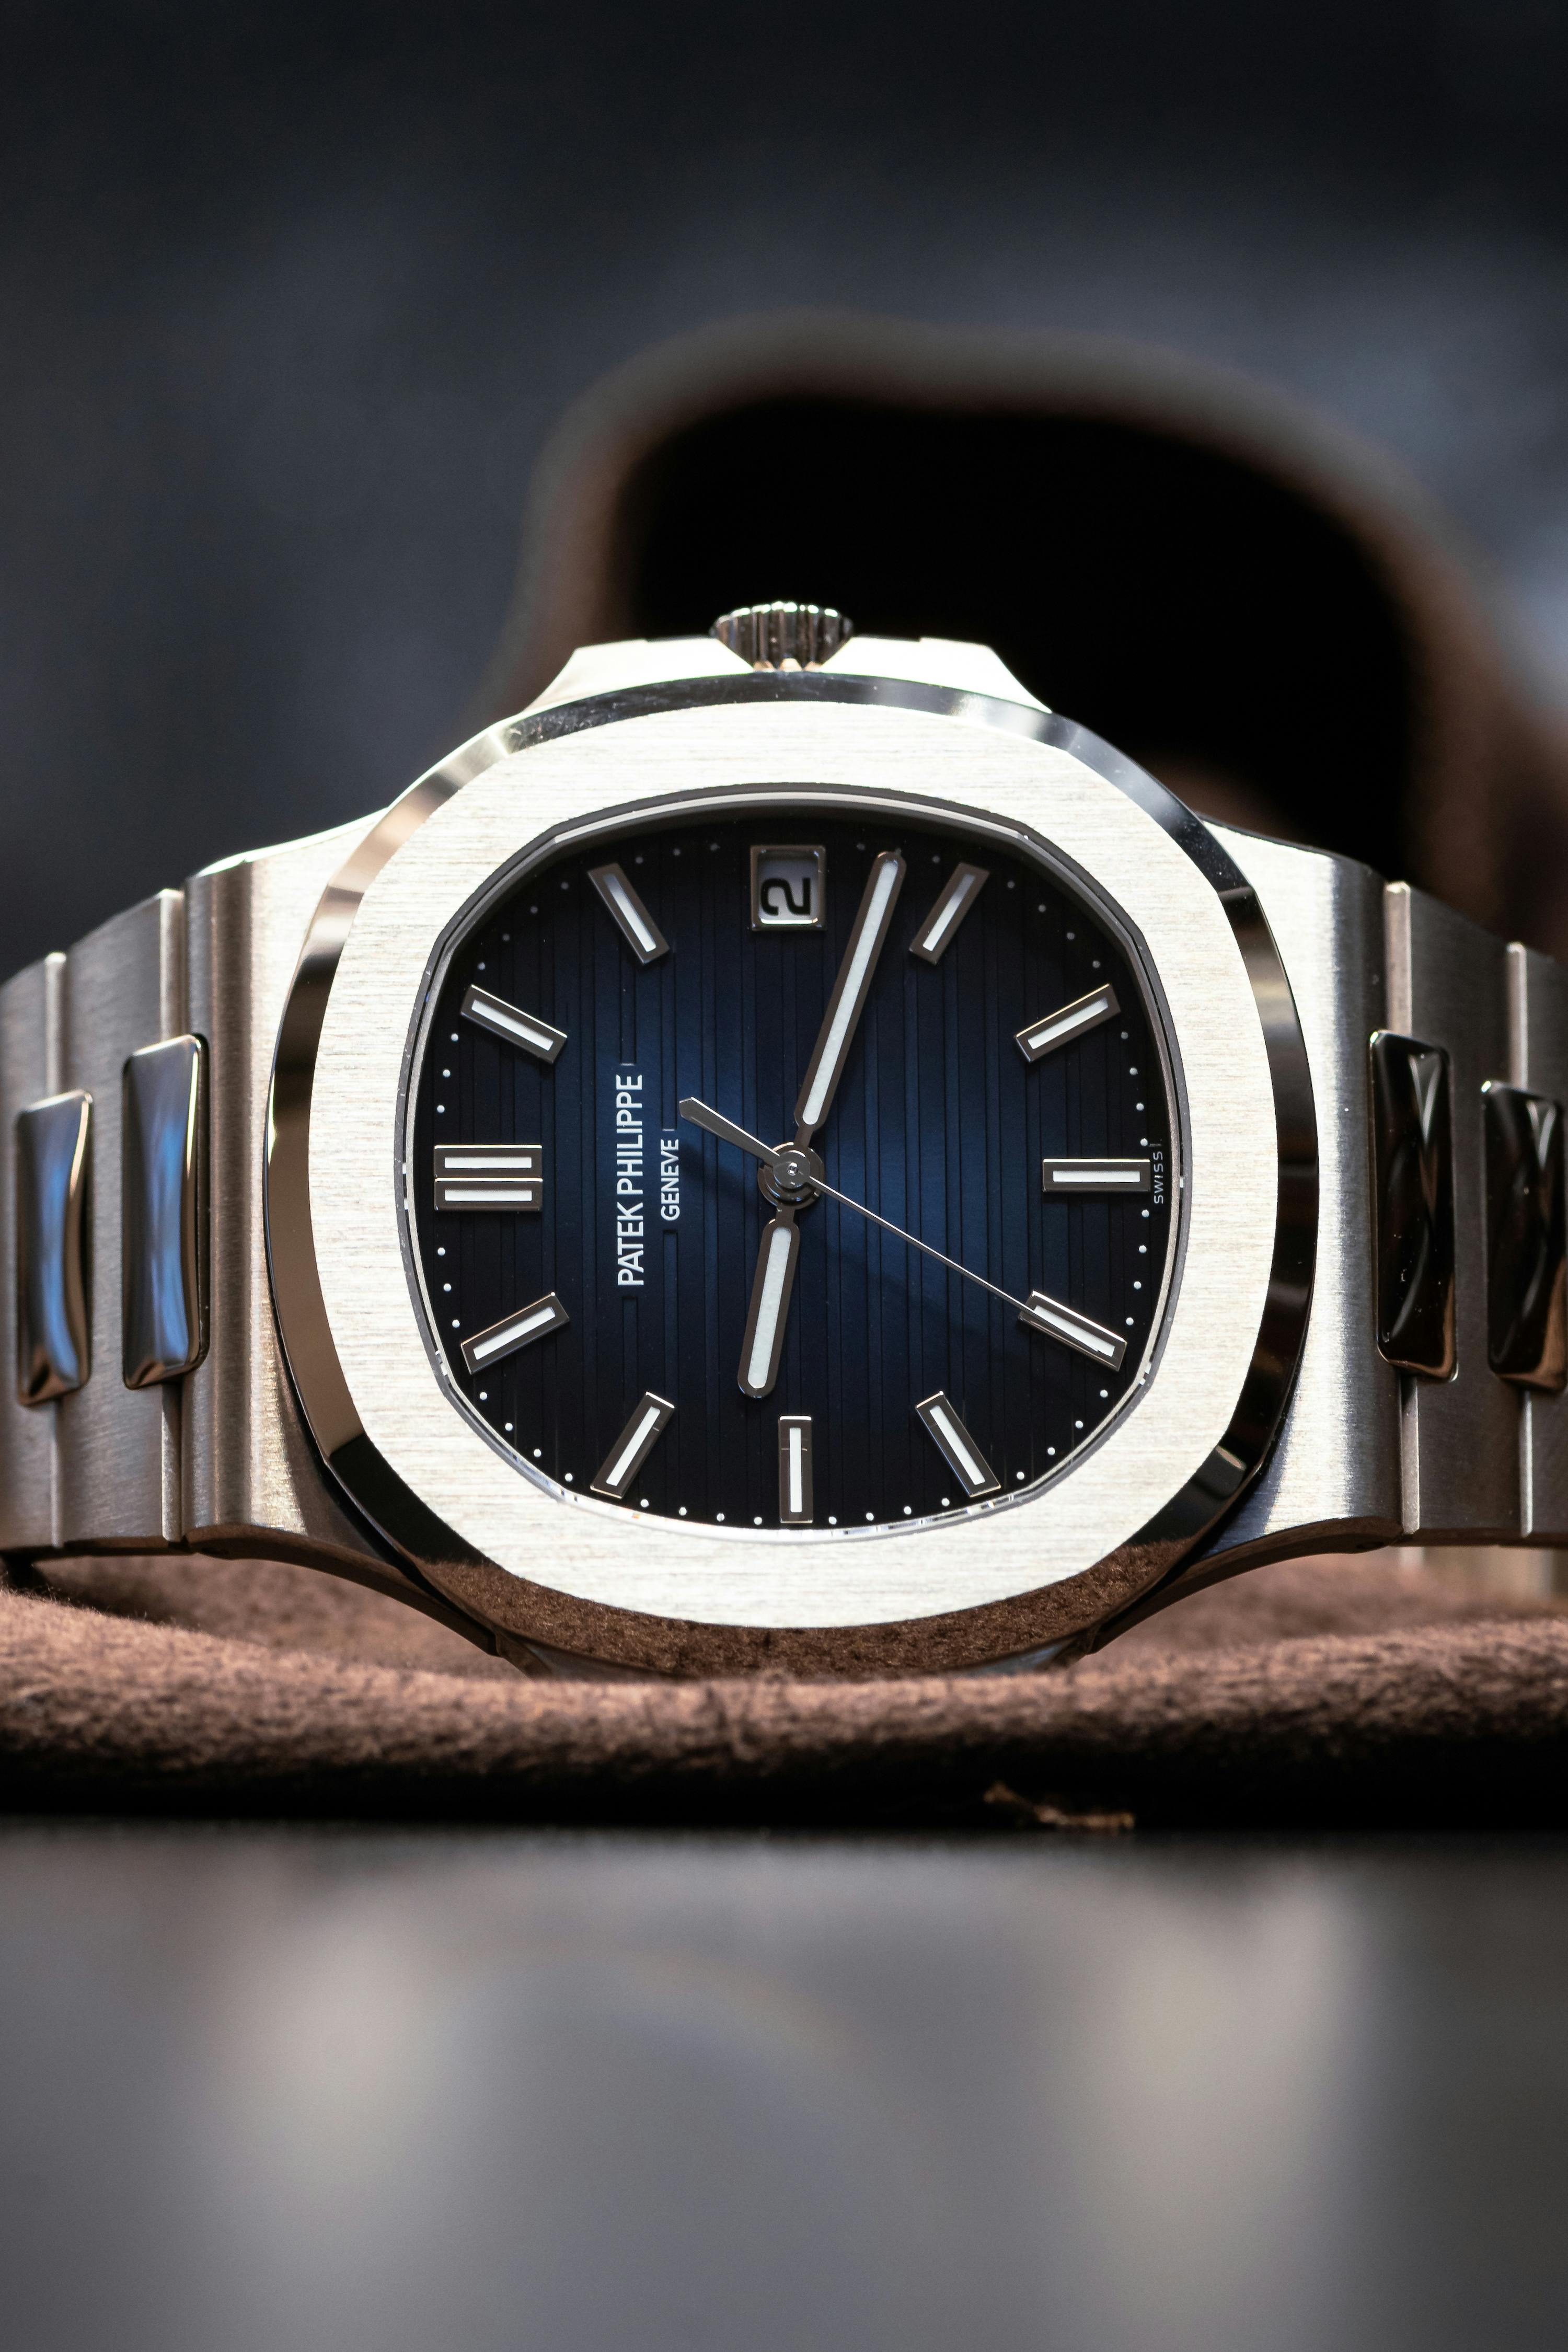 2022 PATEK PHILIPPE NAUTILUS '5811' for sale by auction in London ...